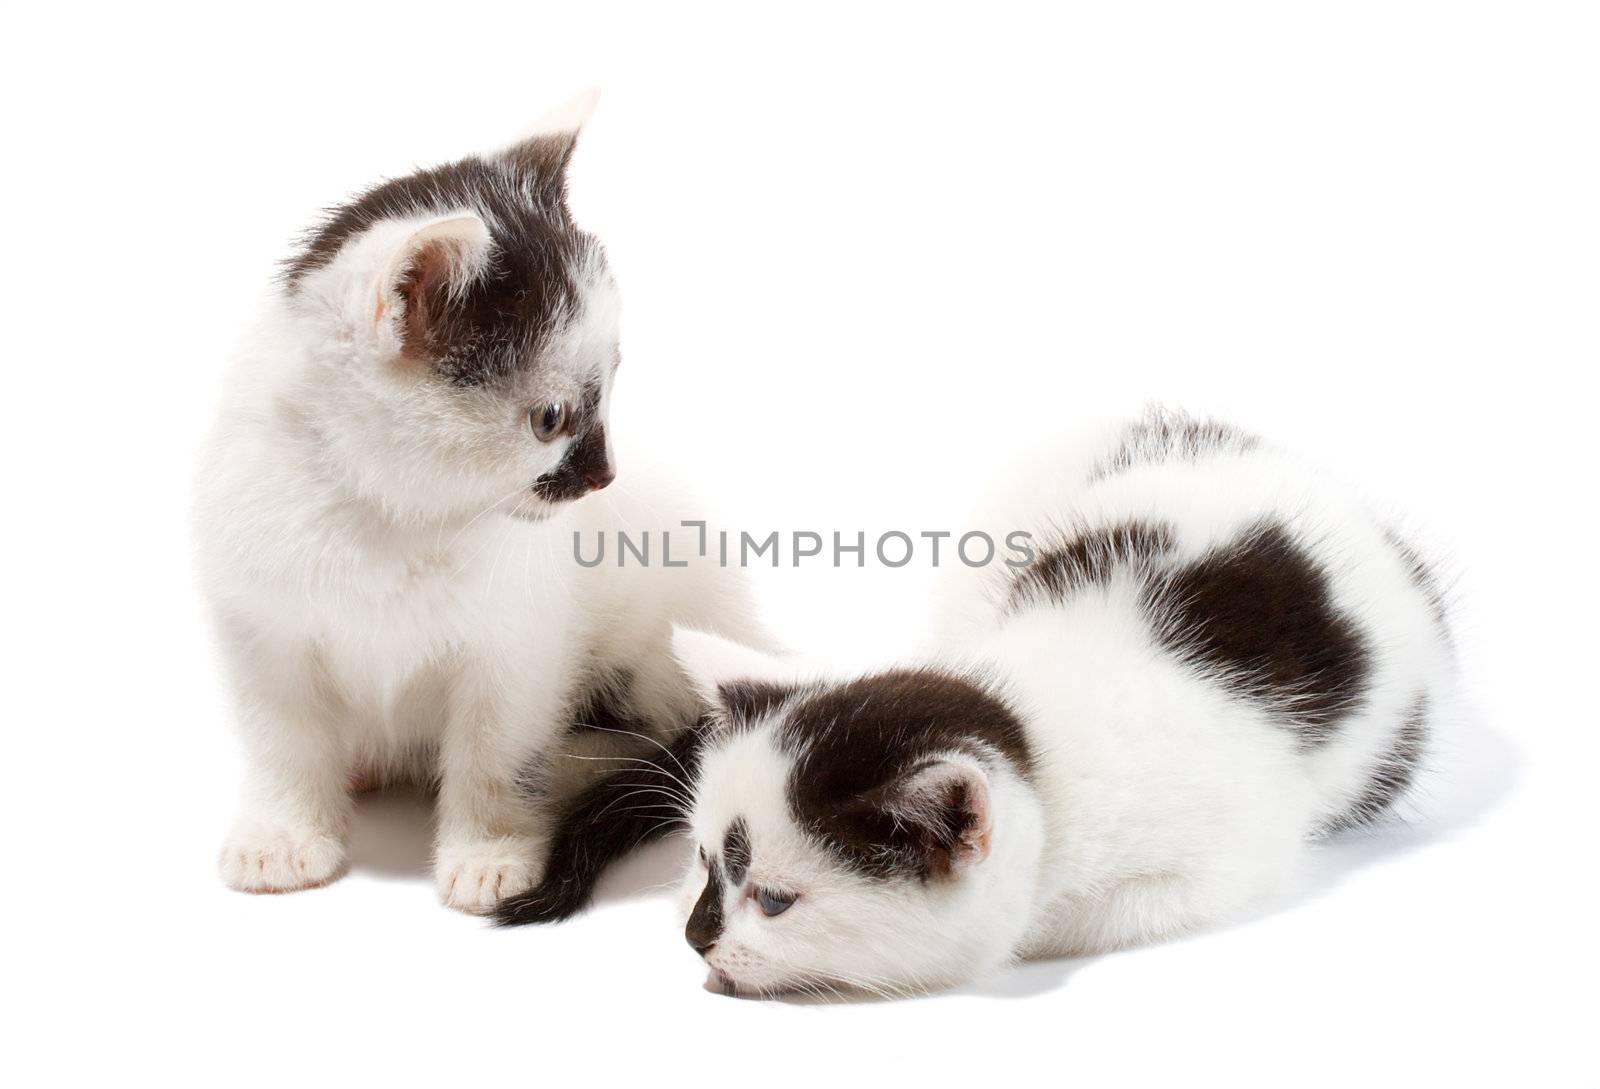 close-up two kittens by Alekcey